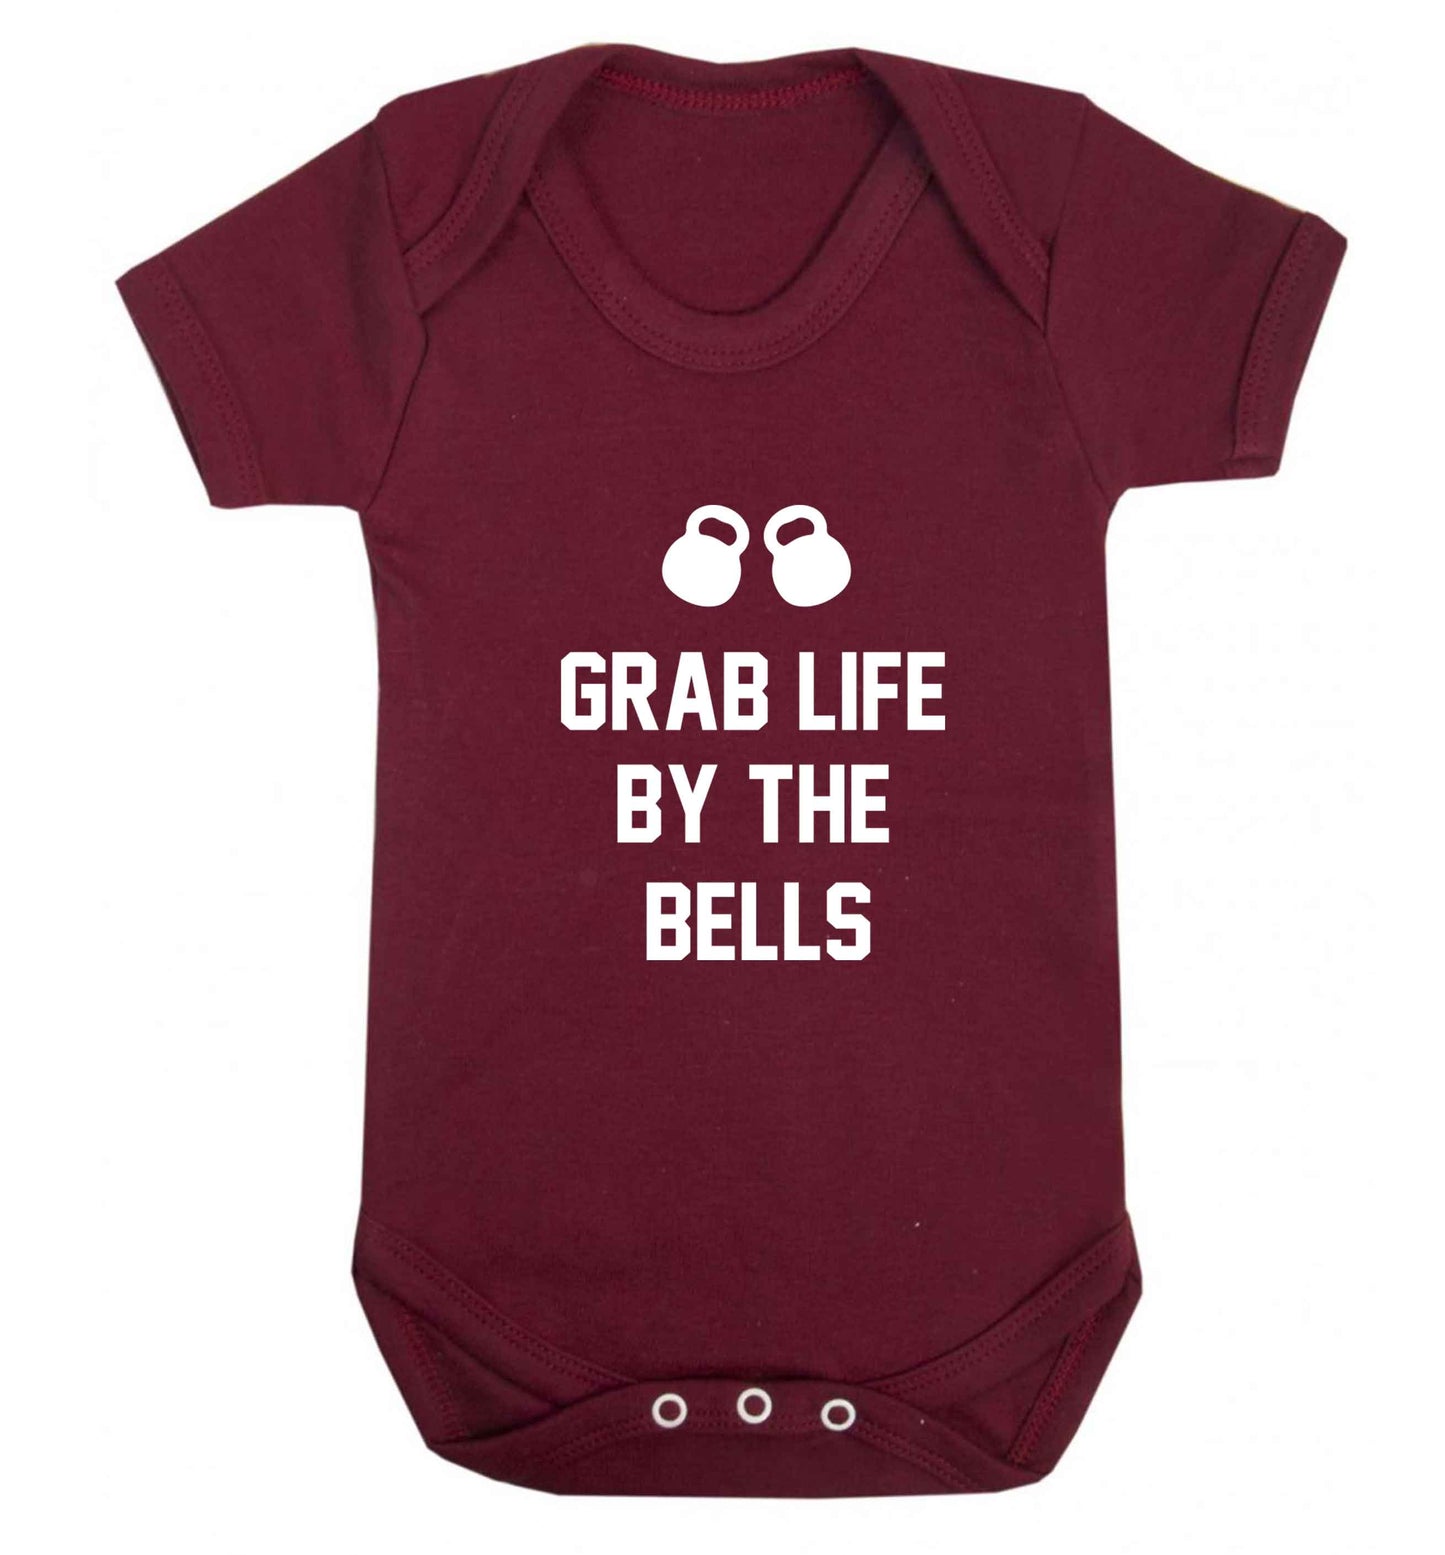 Grab life by the bells baby vest maroon 18-24 months